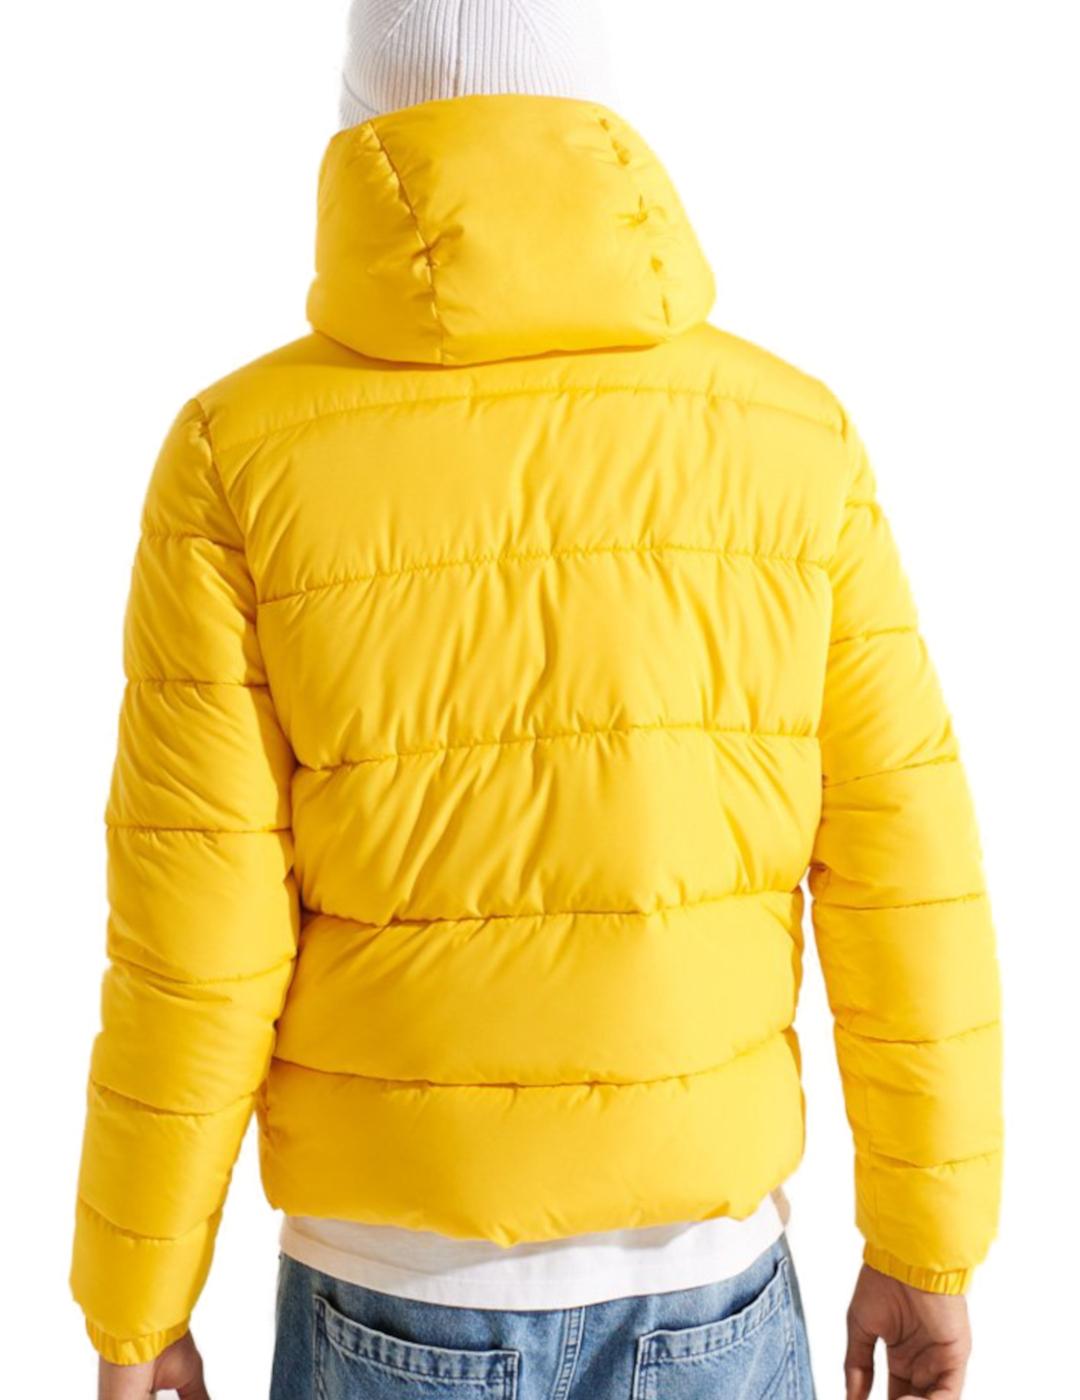 Útil Pino solicitud Plumas Superdry Hooded sports amarillo hombre-z